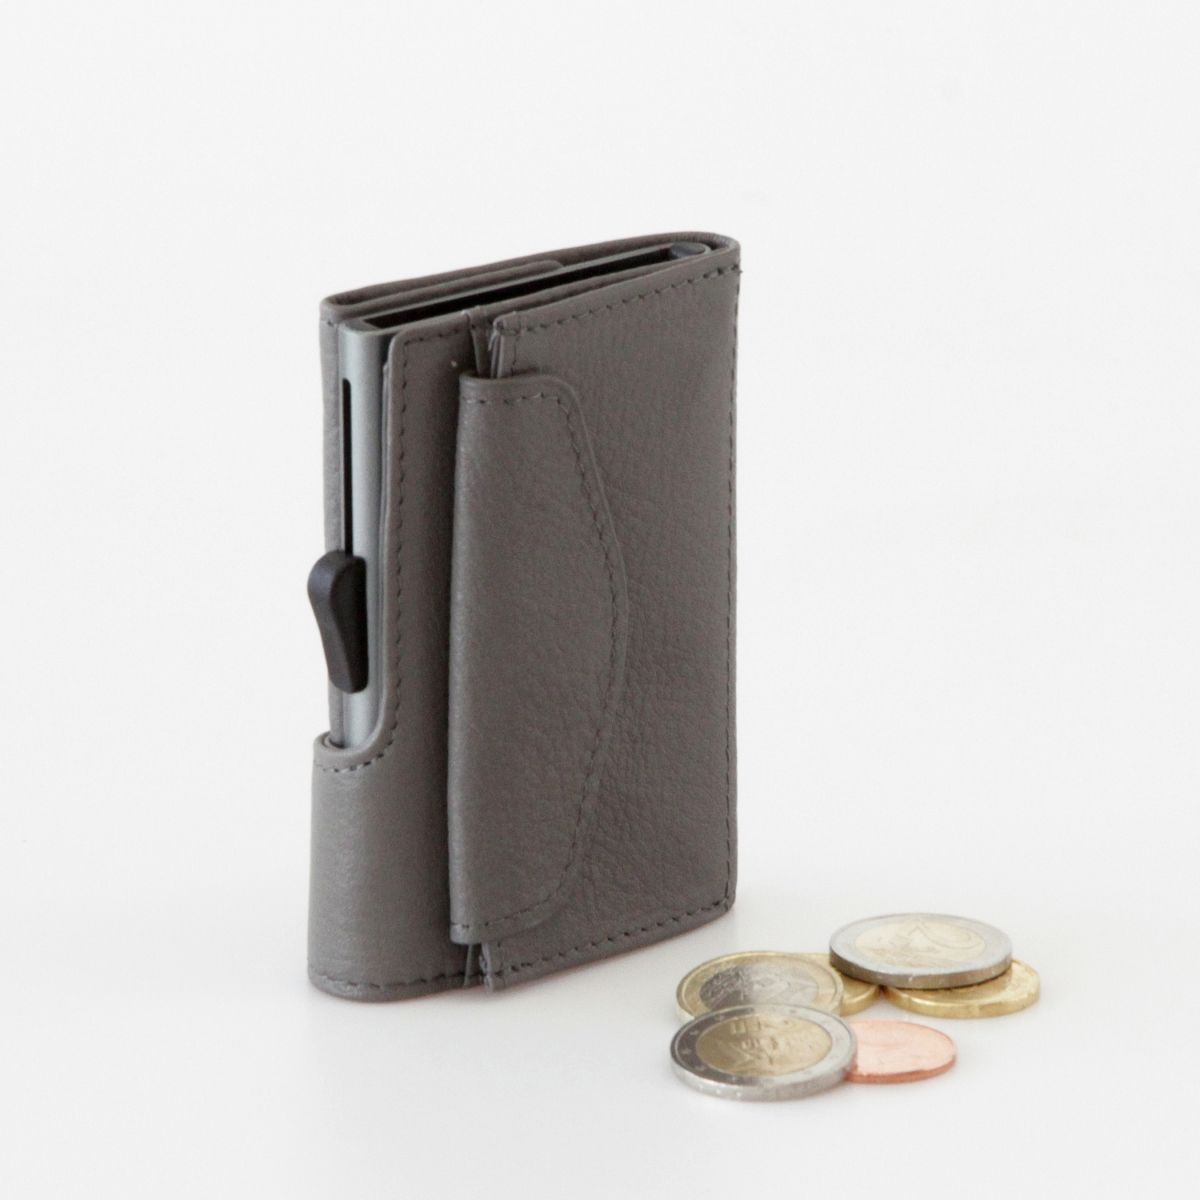 C-Secure Aluminum Card Holder with Genuine Leather and Coin Pouch - Grey